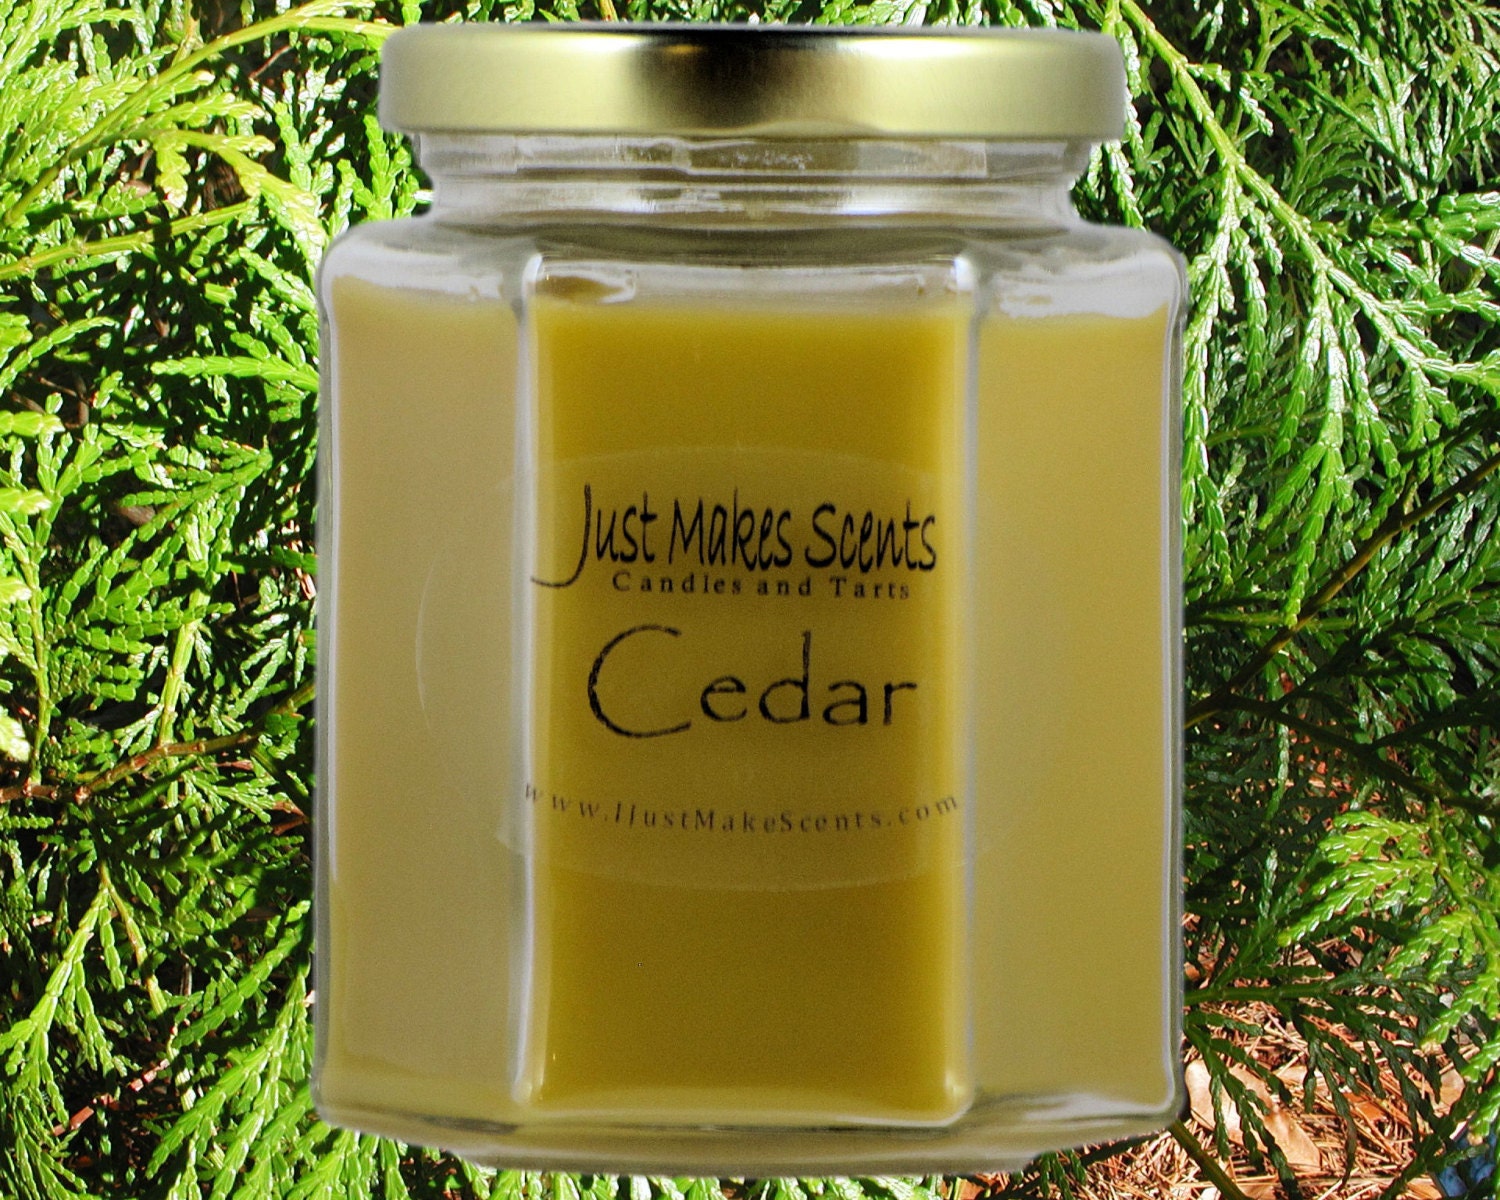 Cedar Scented Blended Soy Candles - Woodsy Masculine Scent Clean Fresh Candle Fragrance